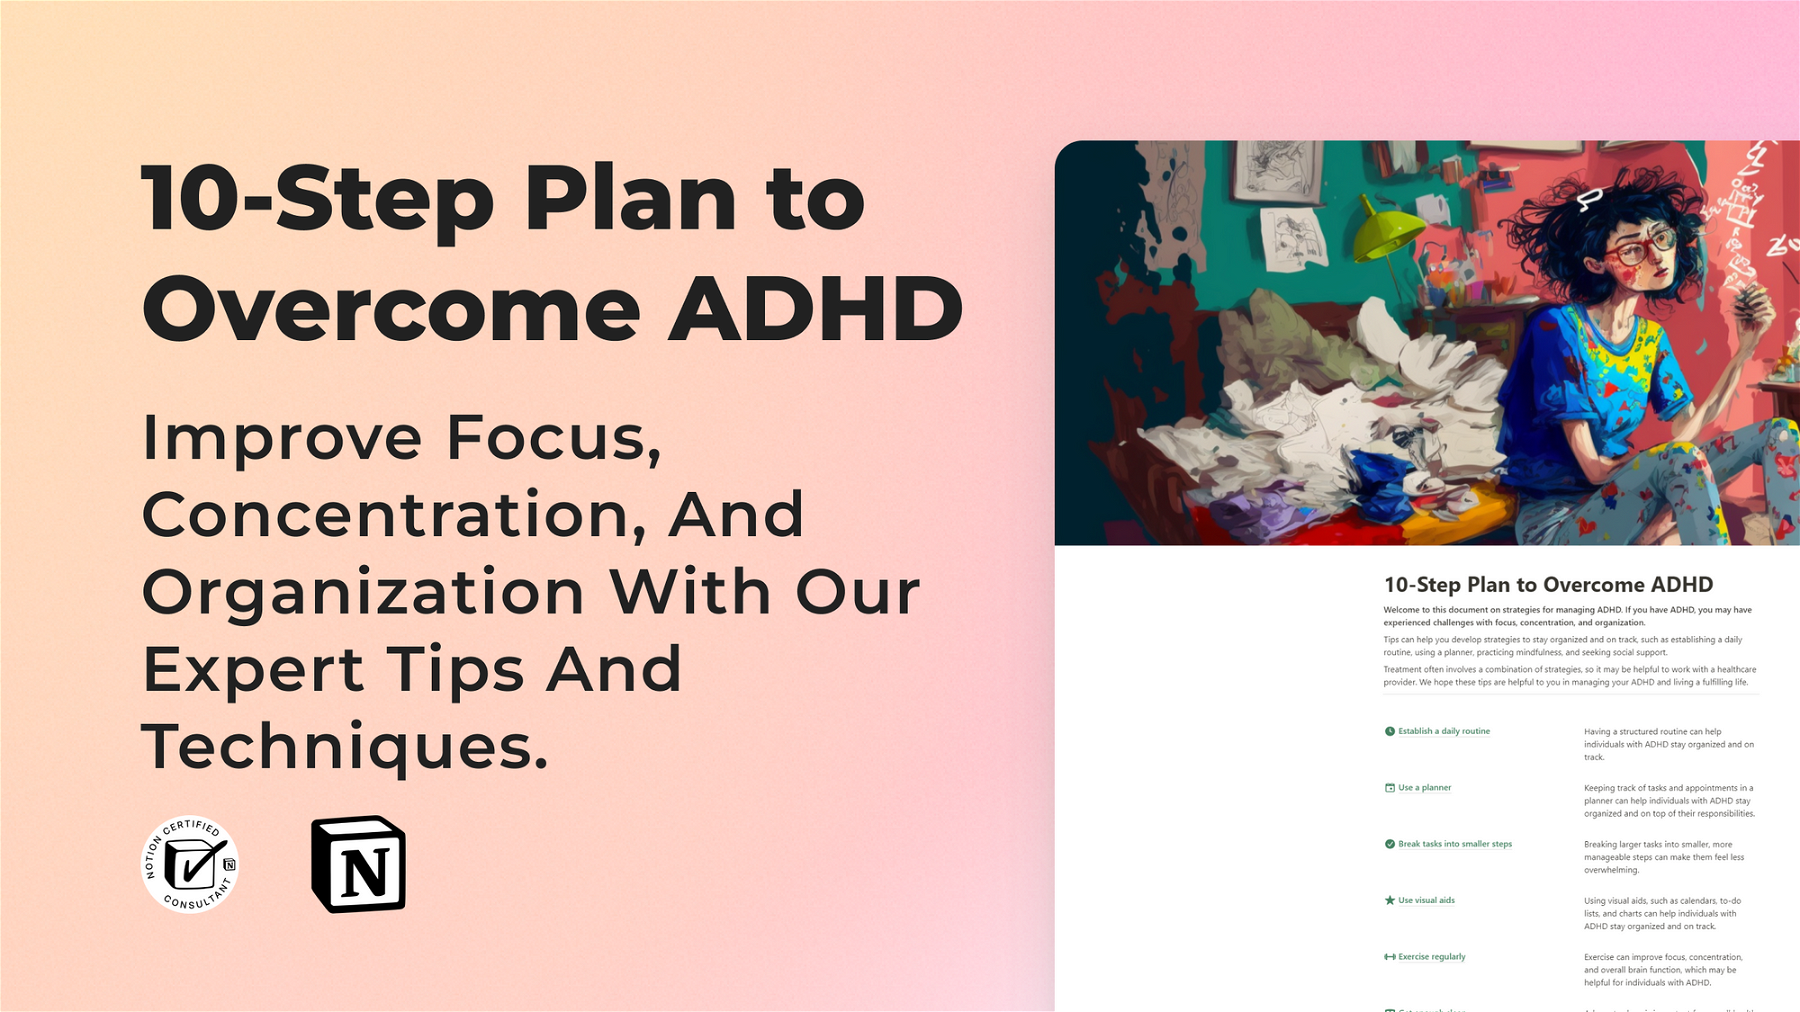 10-Step Plan to Overcome ADHD